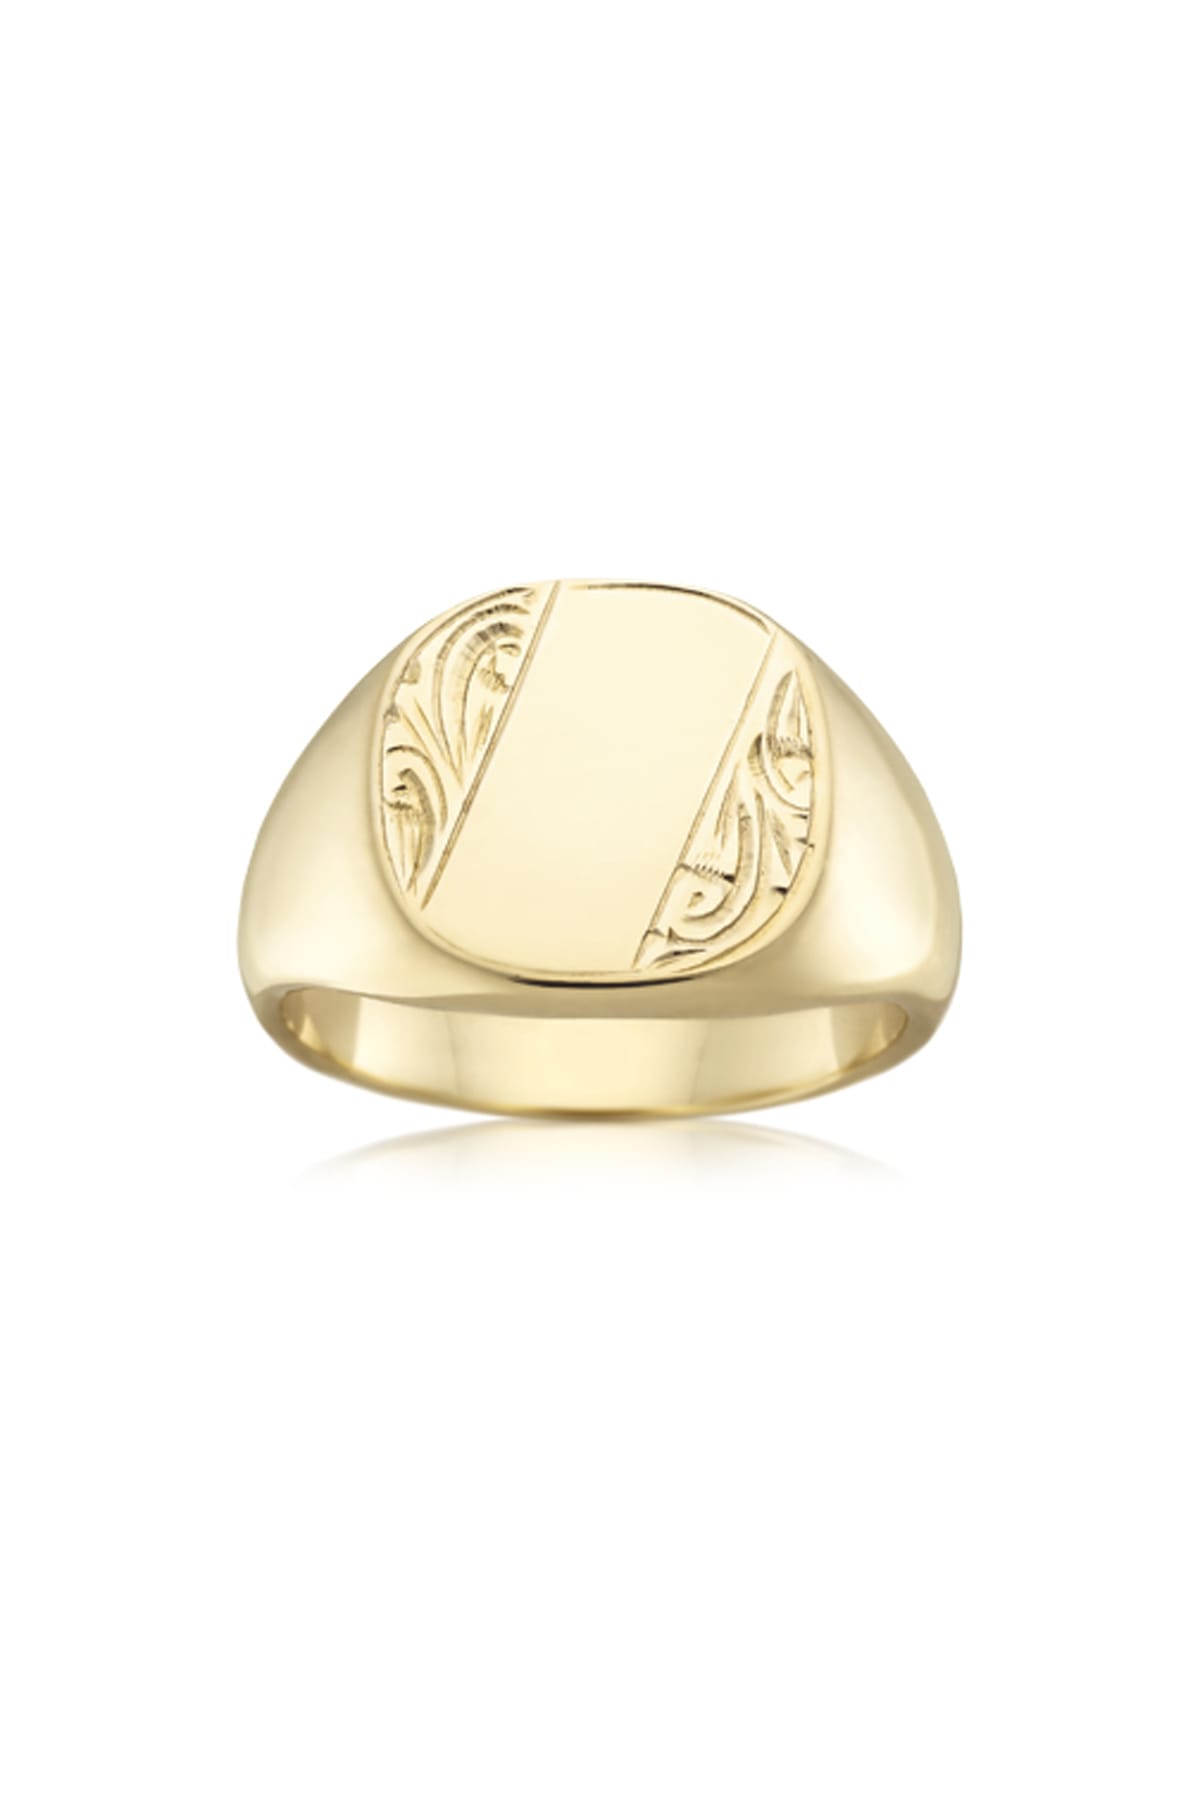 Solid Hand Engraved Flat Top Signet Ring available at LeGassick Diamonds and Jewellery Gold Coast, Australia.